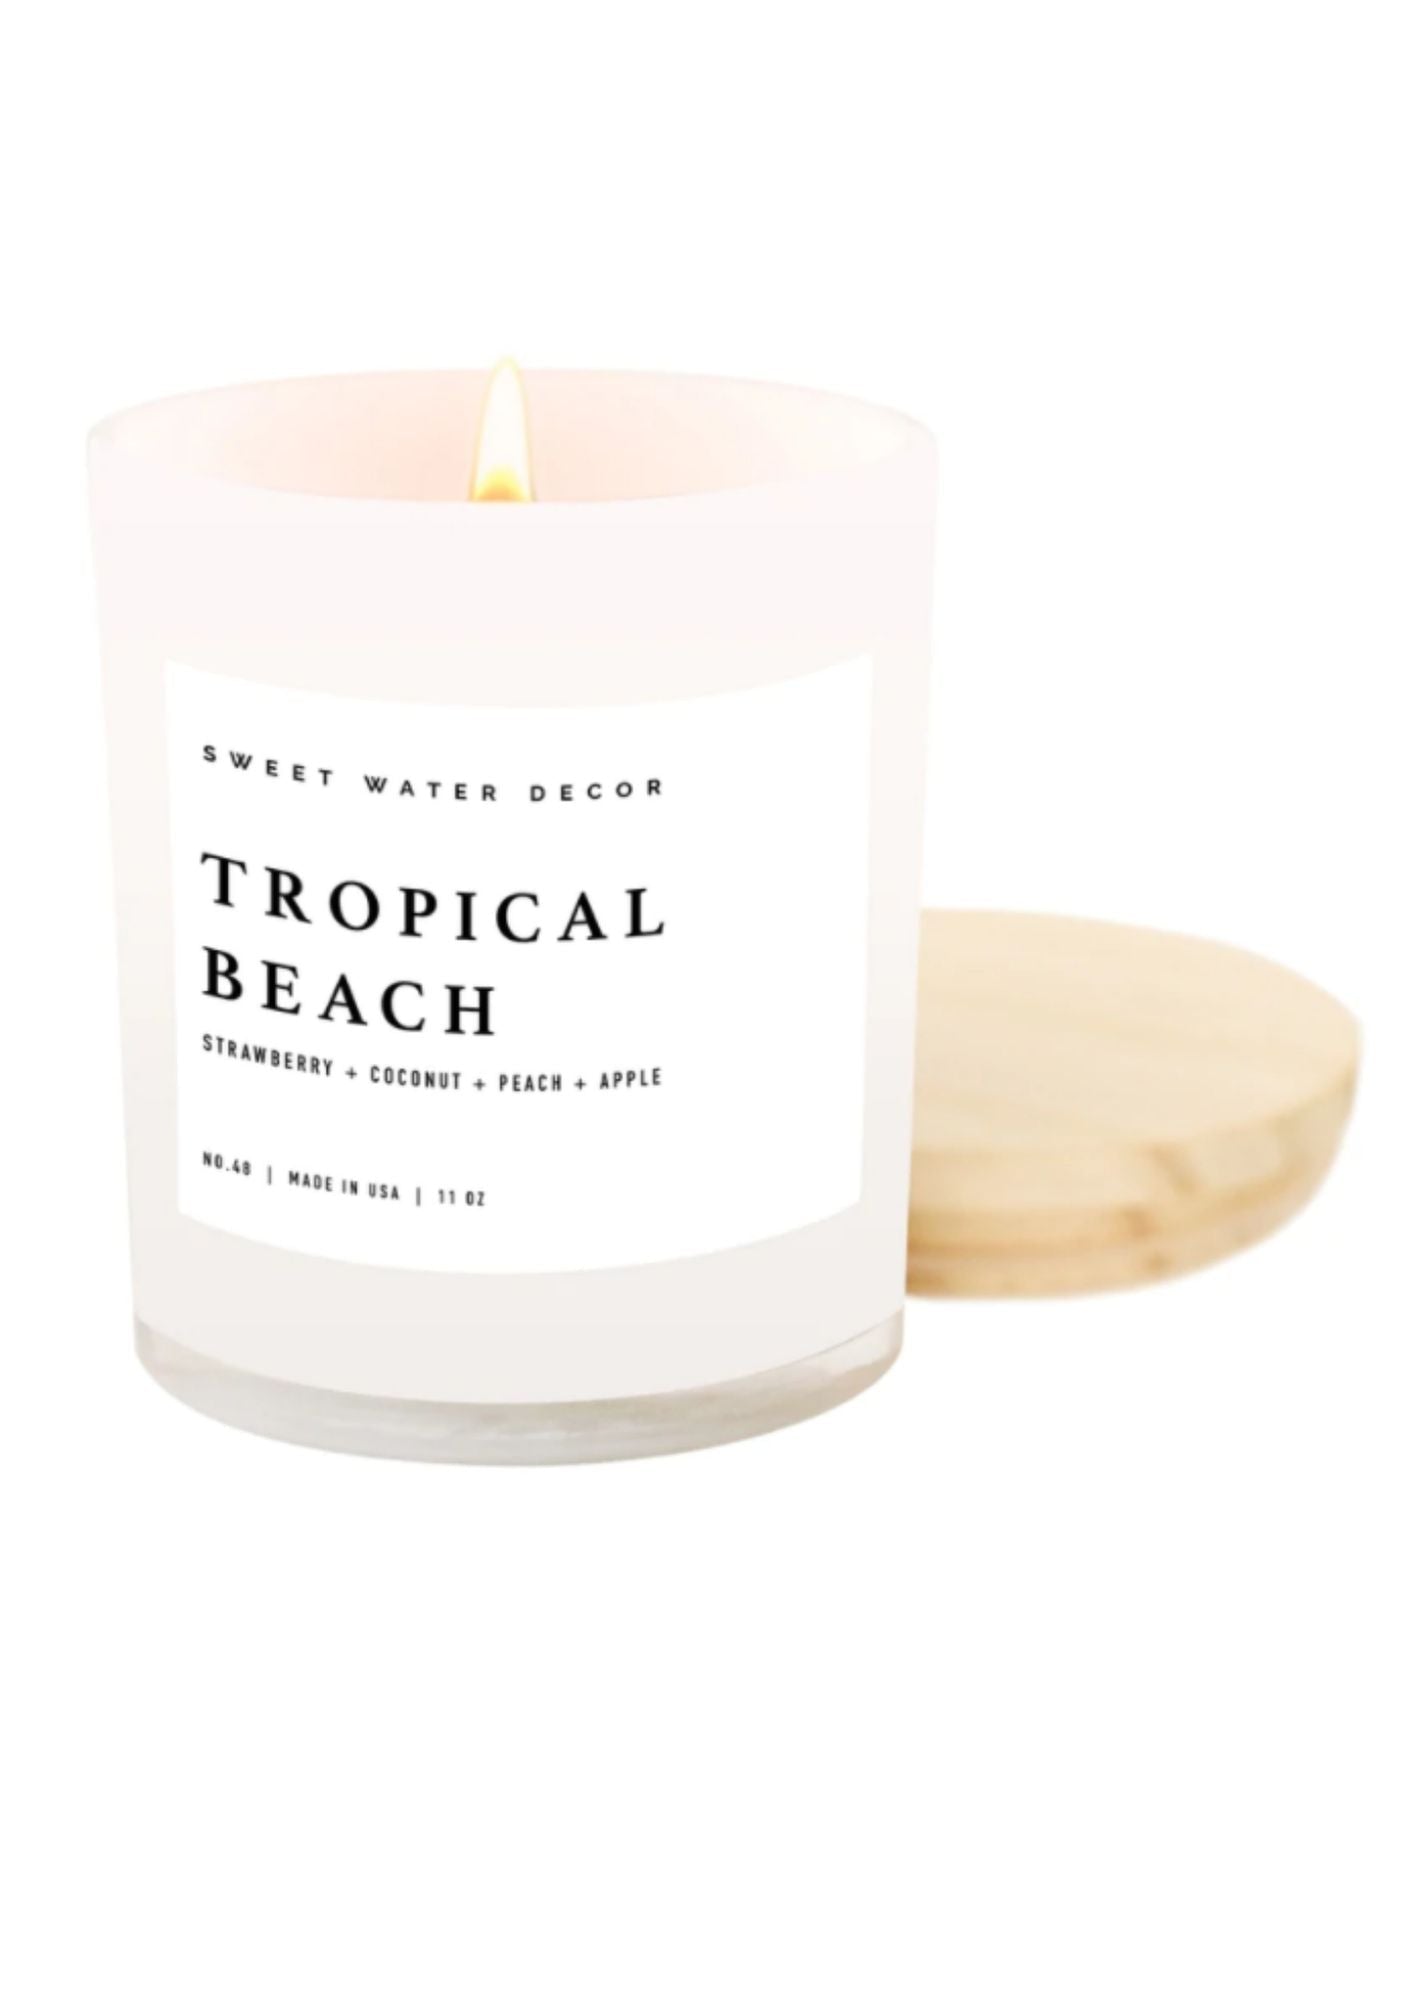 Tropical Beach Soy Candle Accessories Sweet Water Decor